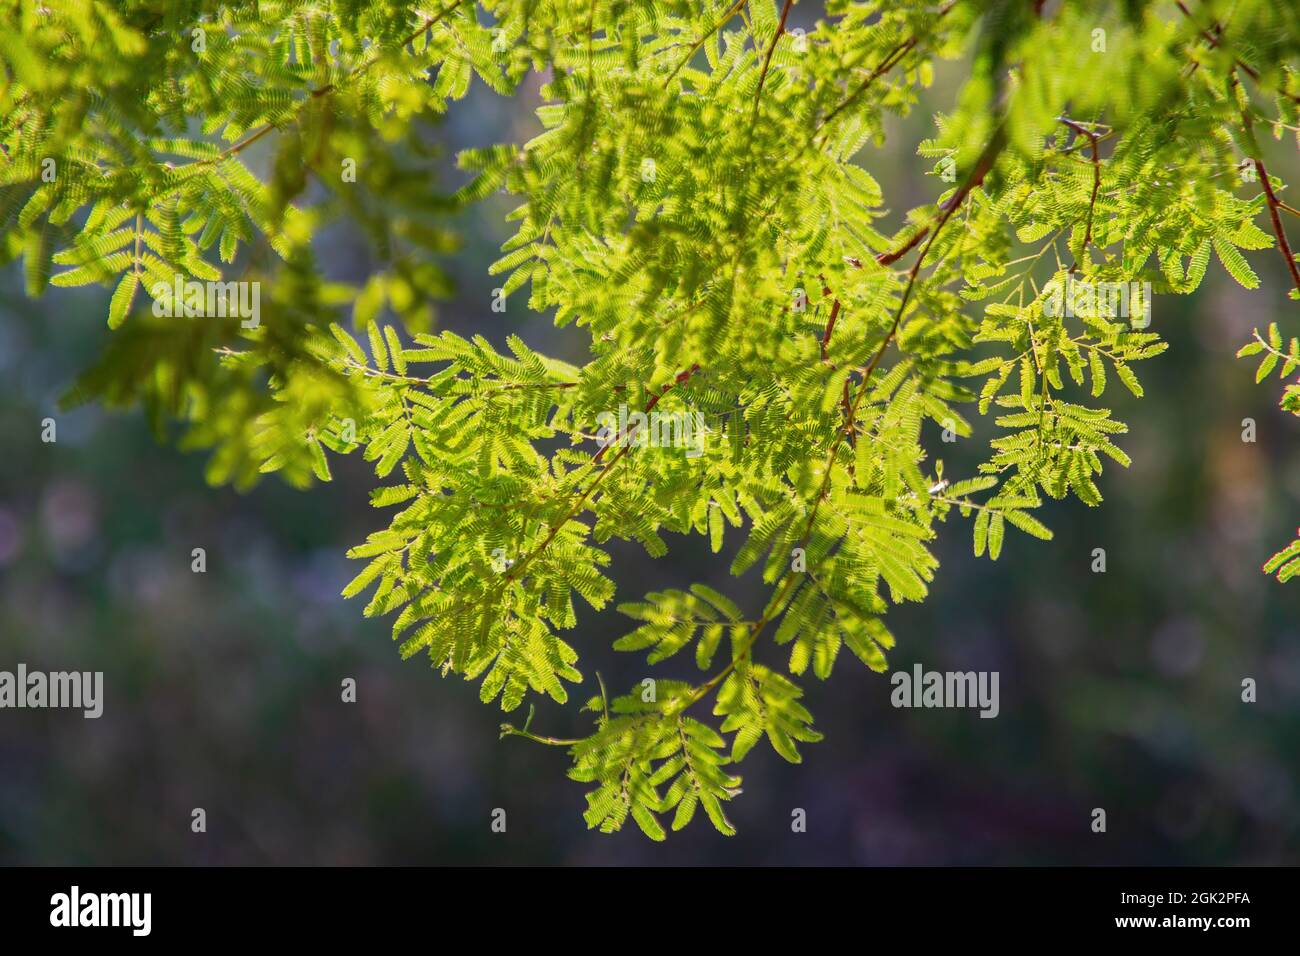 Close up shot of some leaves of the Acacia tree at Las Vegas, Nevada Stock Photo